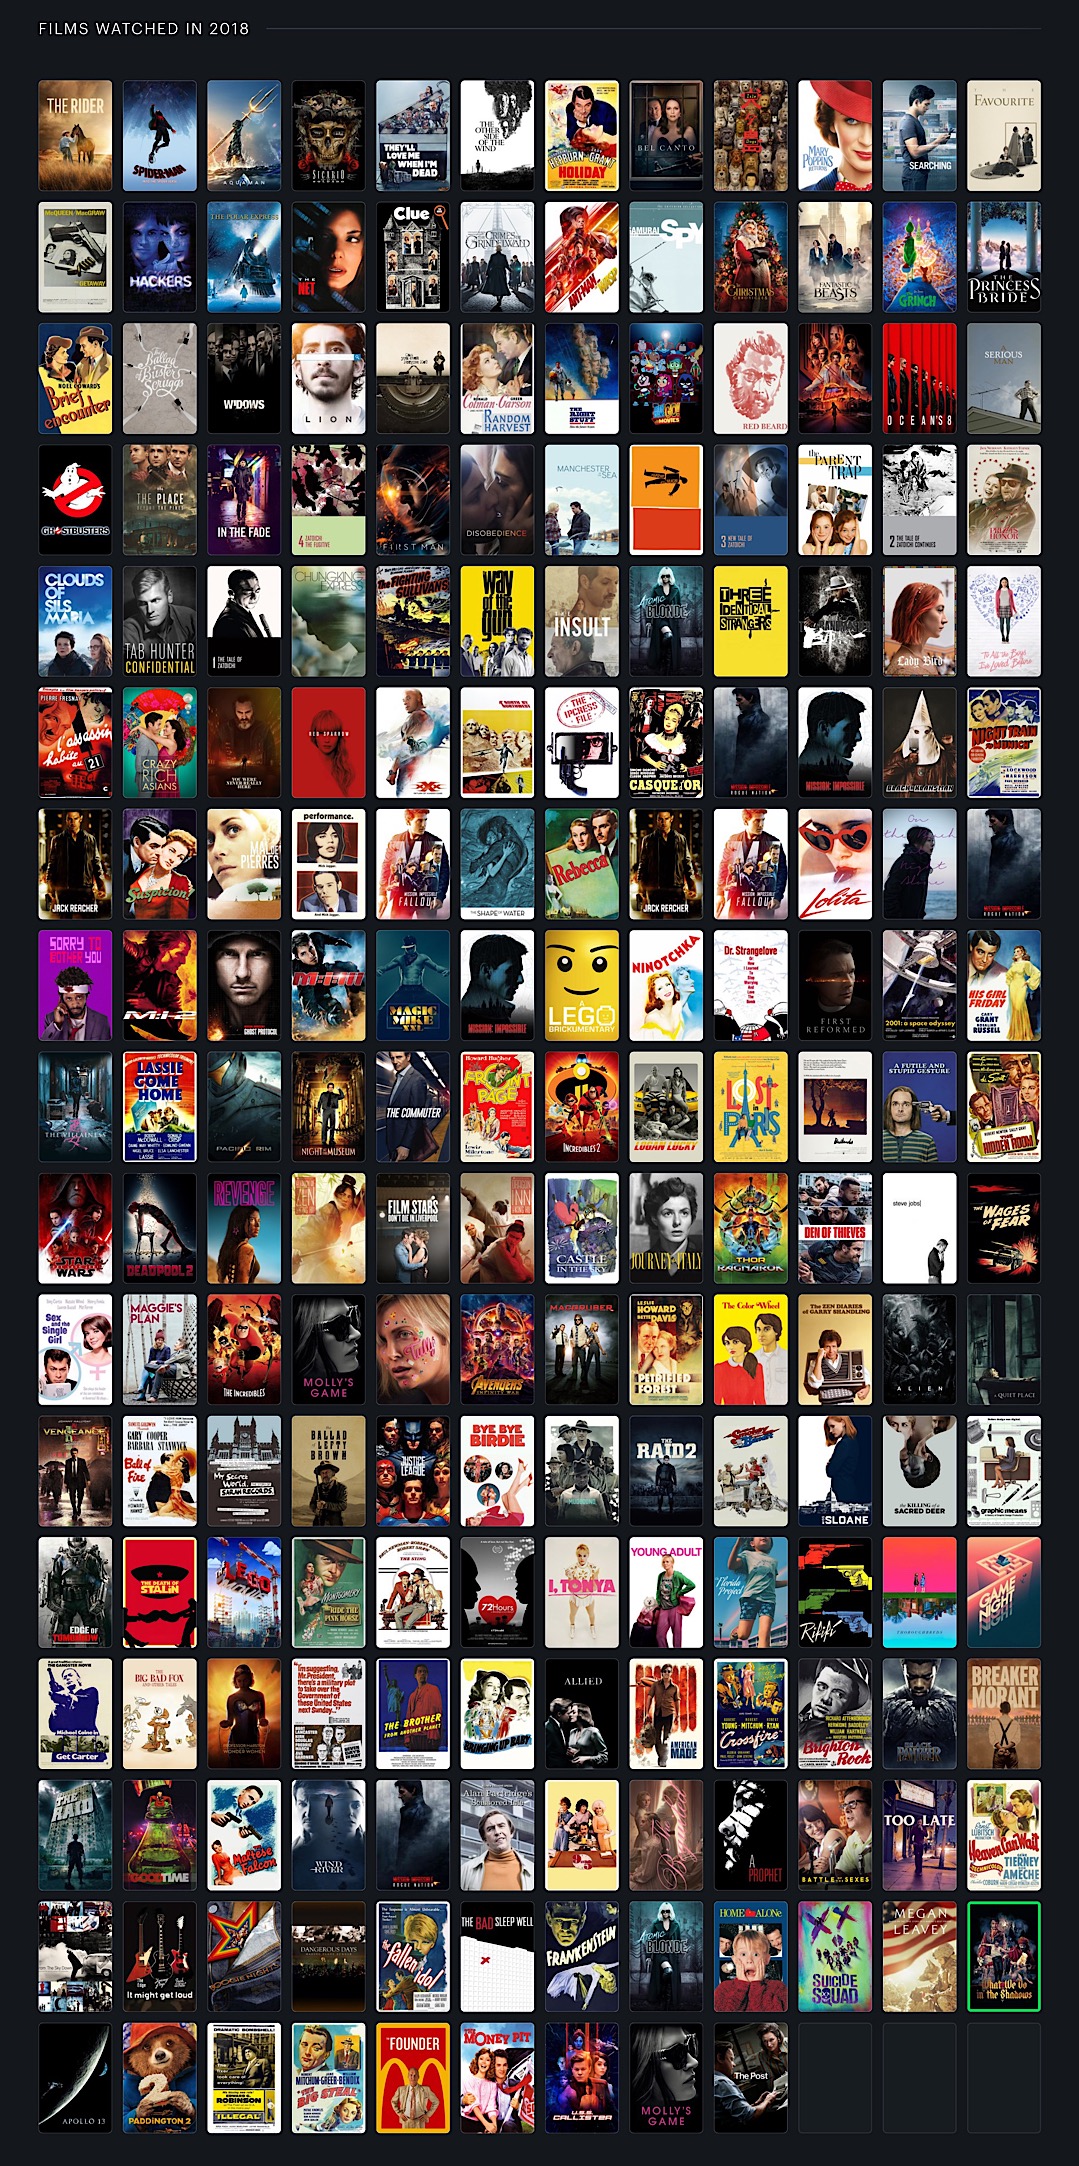 Posters from Movies Watched in 2019